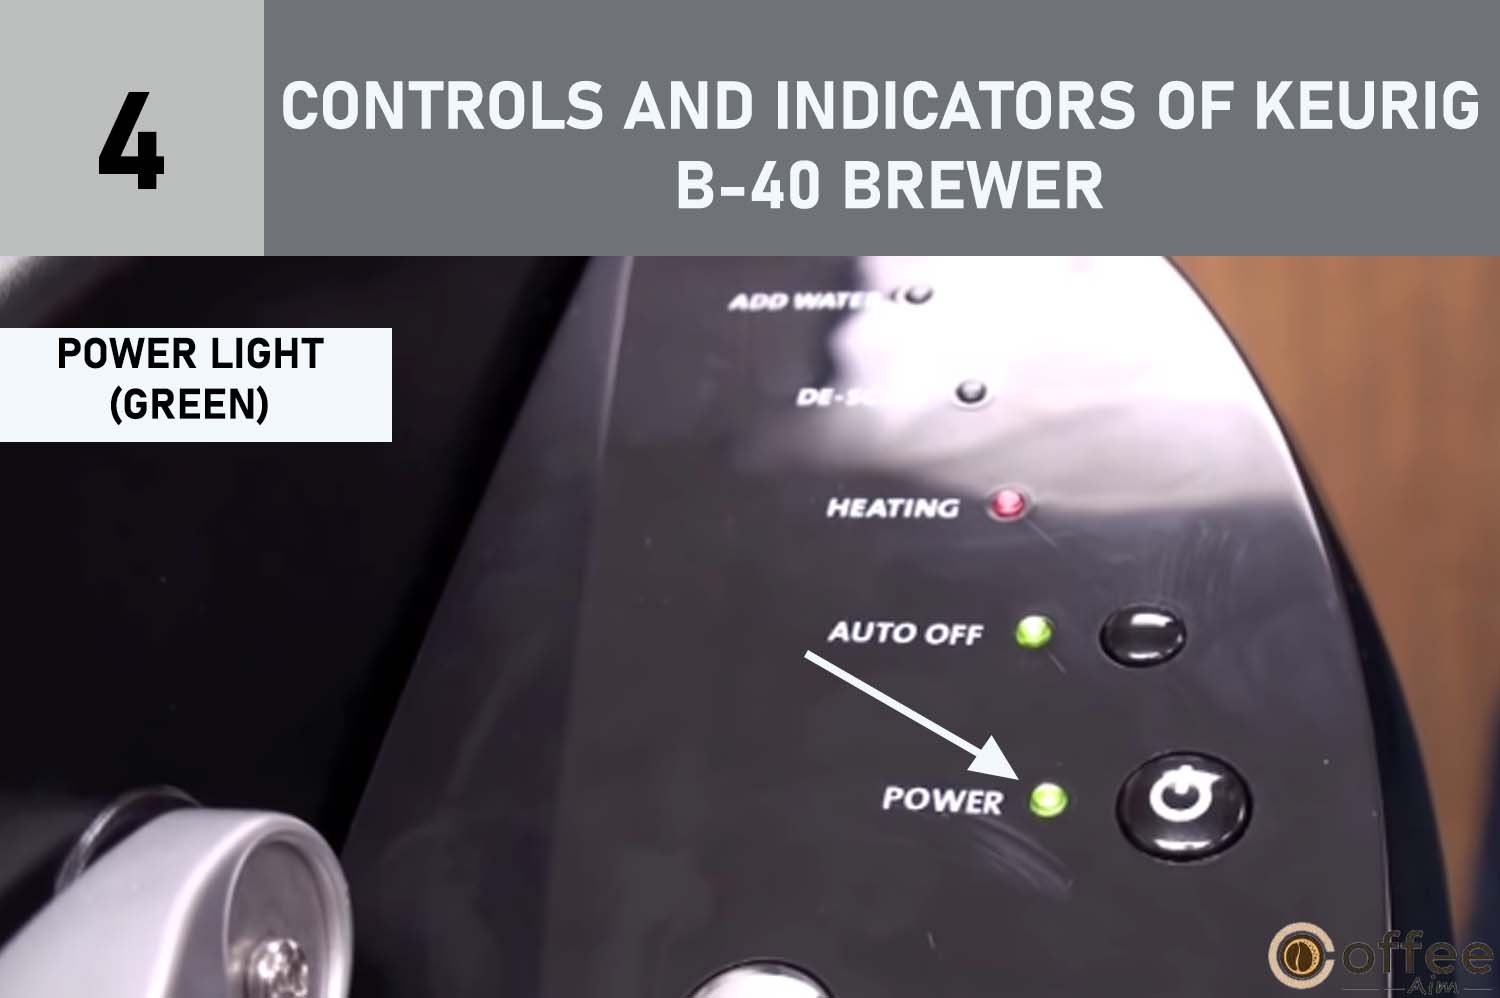 Illustrating the "Power Light (Green)" – Part of the "Controls and Indicators of the Keurig B-40 Brewer"

Description: The radiant "Power Light (Green)" indicator, a prominent feature amidst the "Controls and Indicators of the Keurig B-40 Brewer